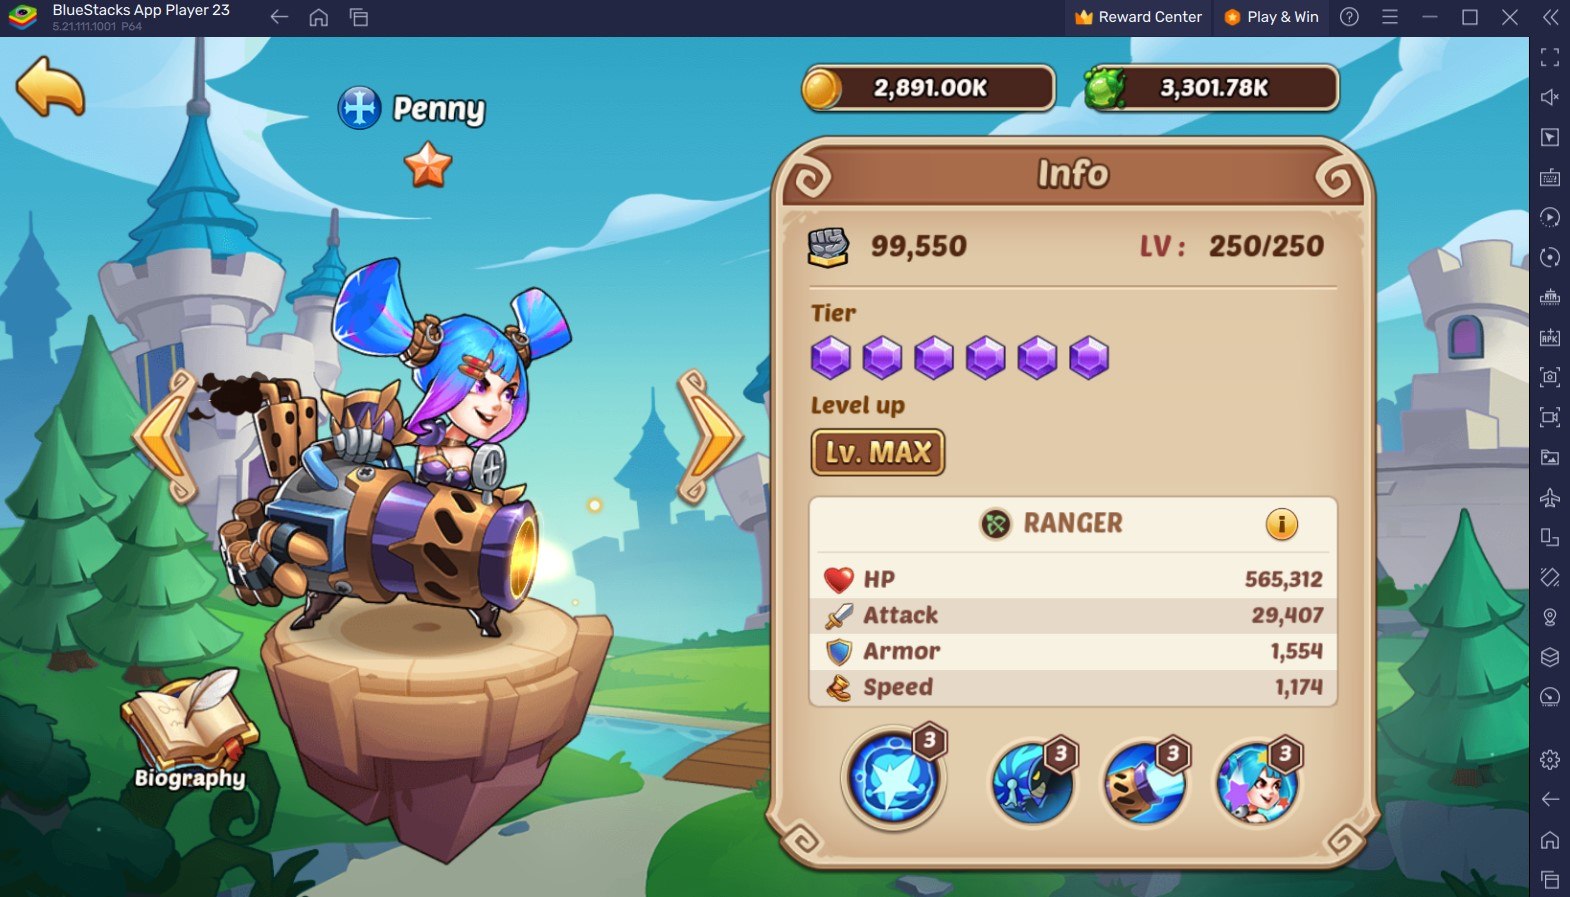 The Best PvP and PvE Heroes in Idle Heroes